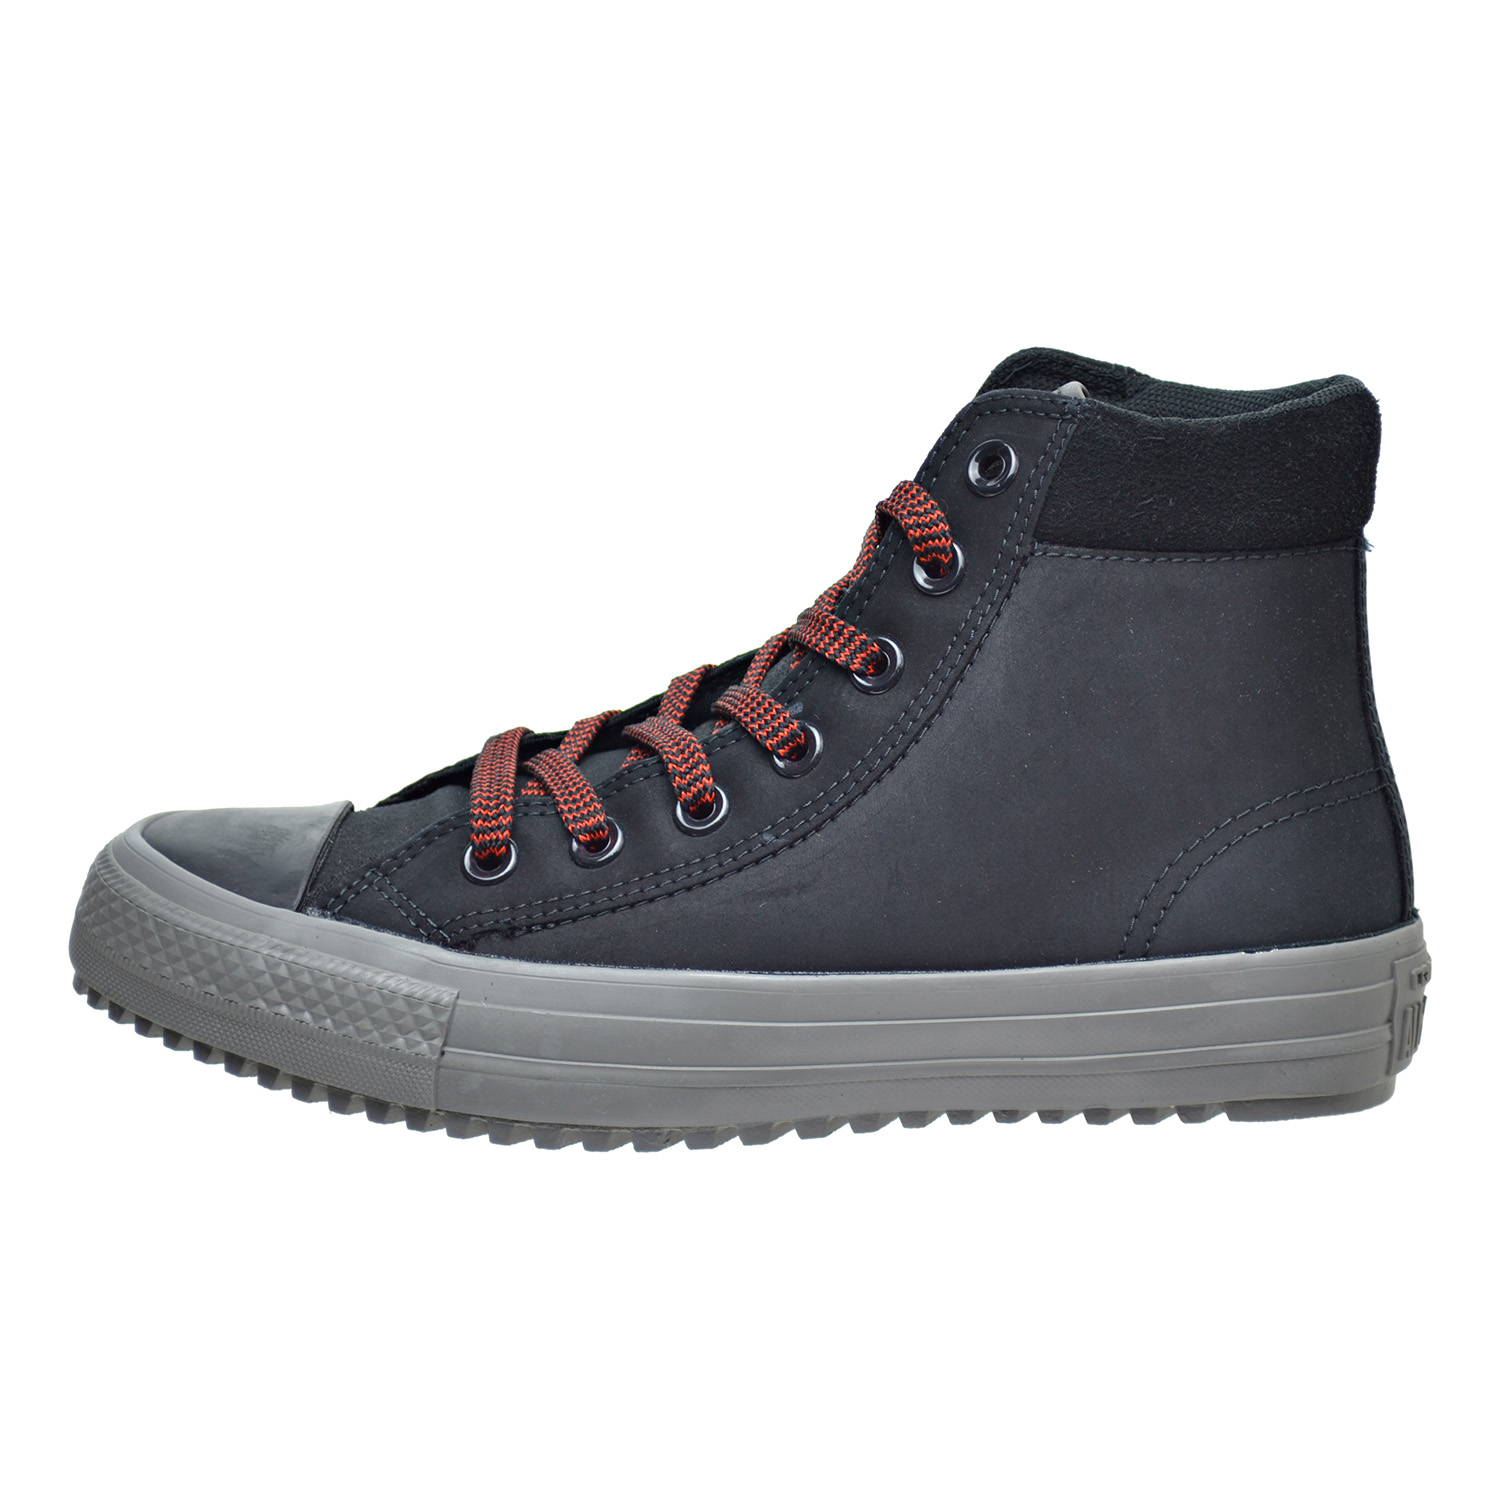 Converse Chuck Taylor All Star PC High Top Unisex Boots Black/Charcoal Grey/Signal Red 153672c - image 4 of 6